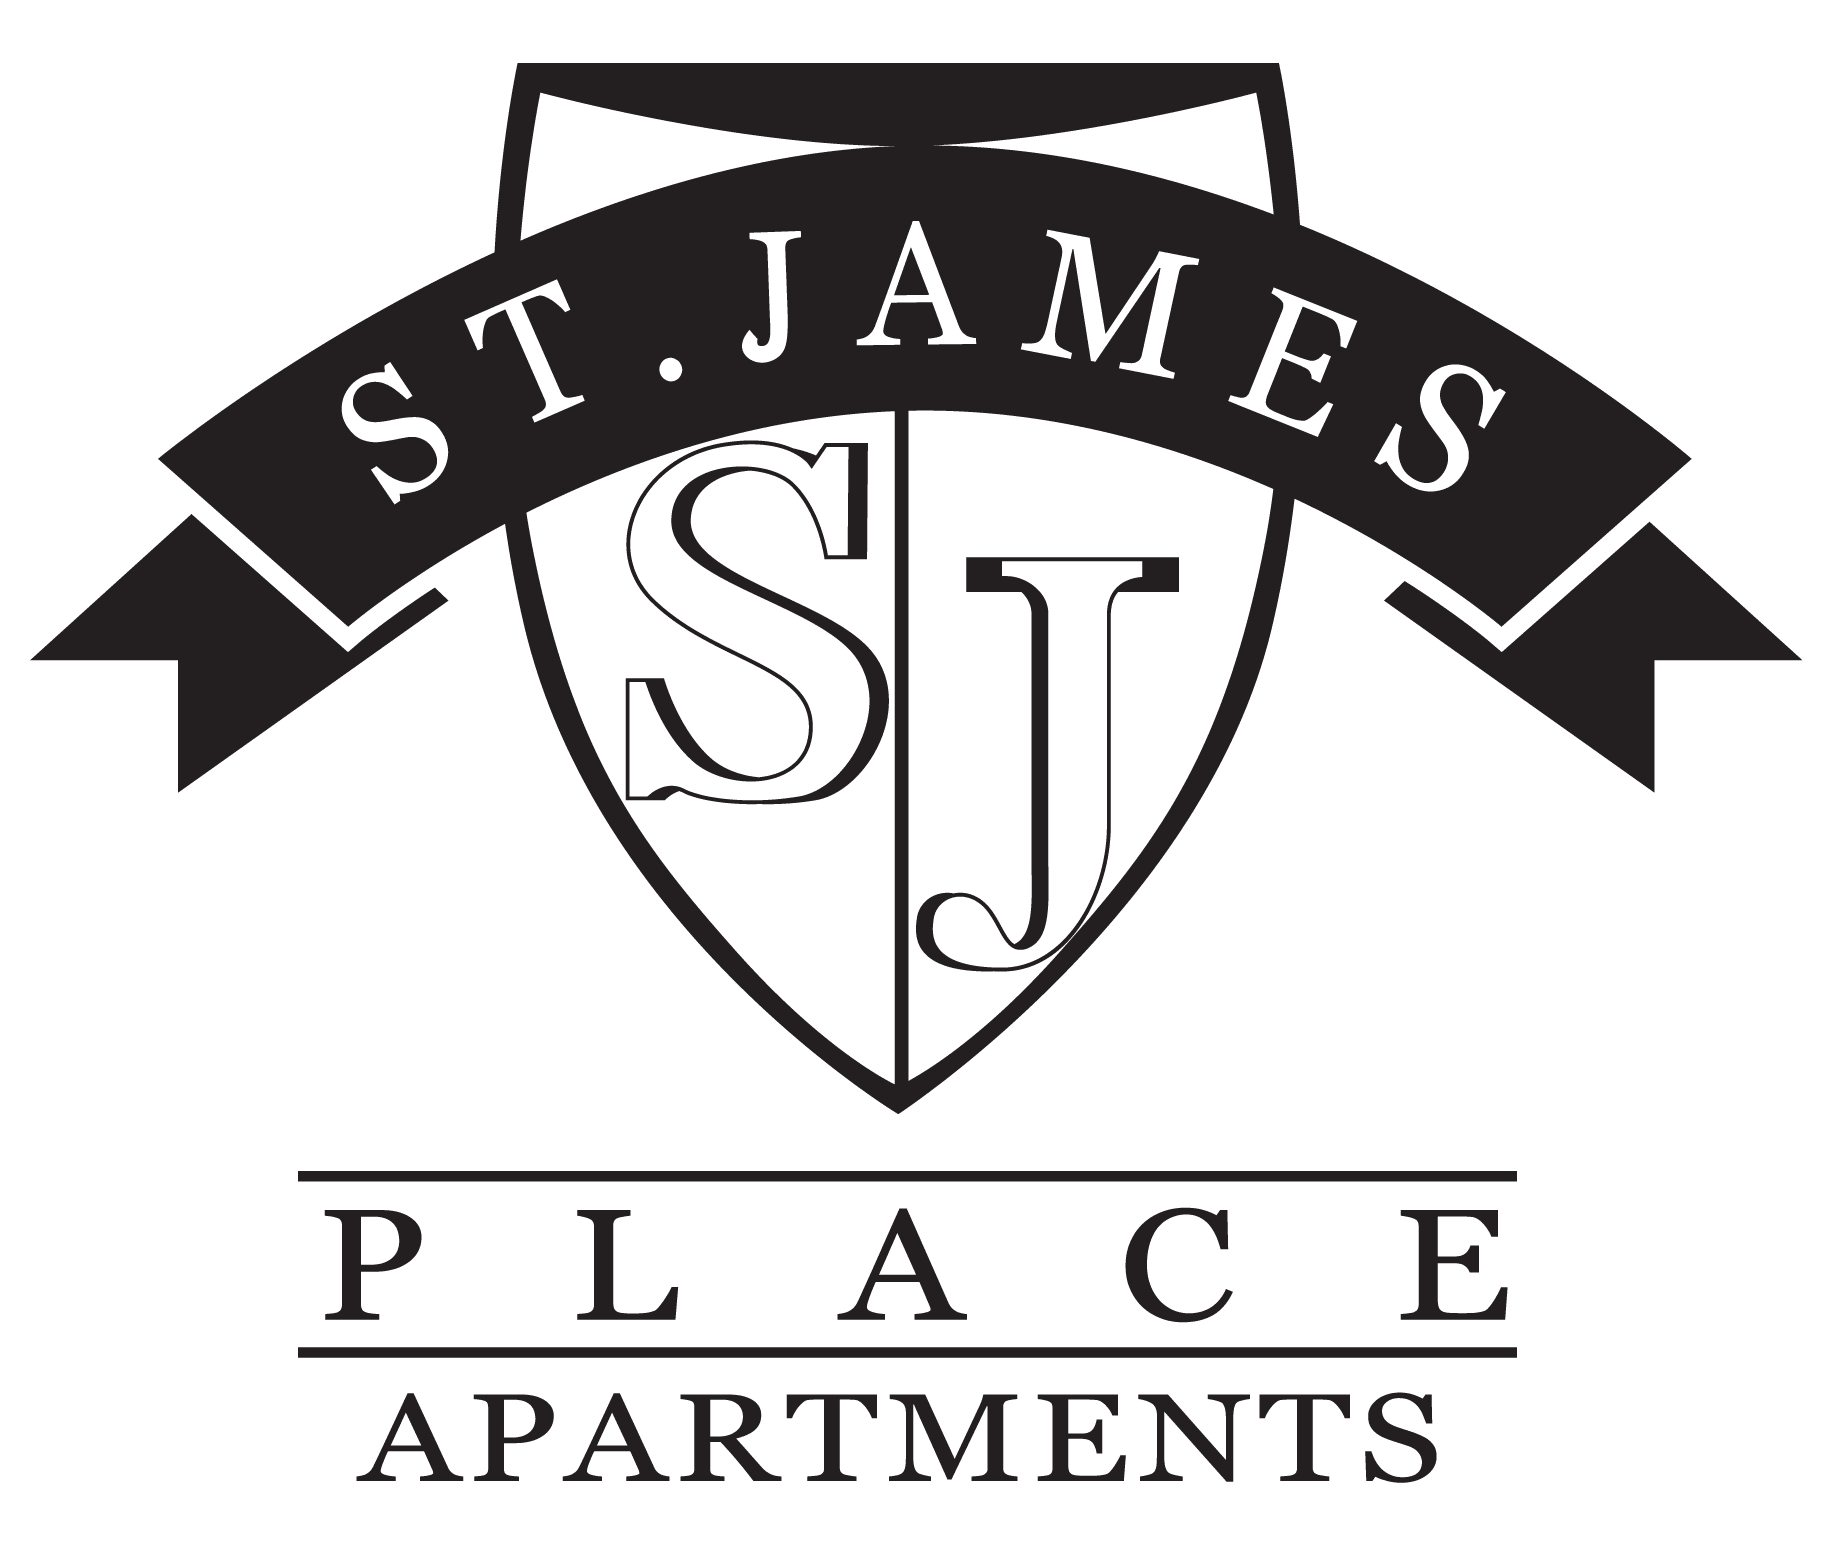 St. James Place Apartments in Northwest Milwaukee - 10300 W. Fountain  Avenue